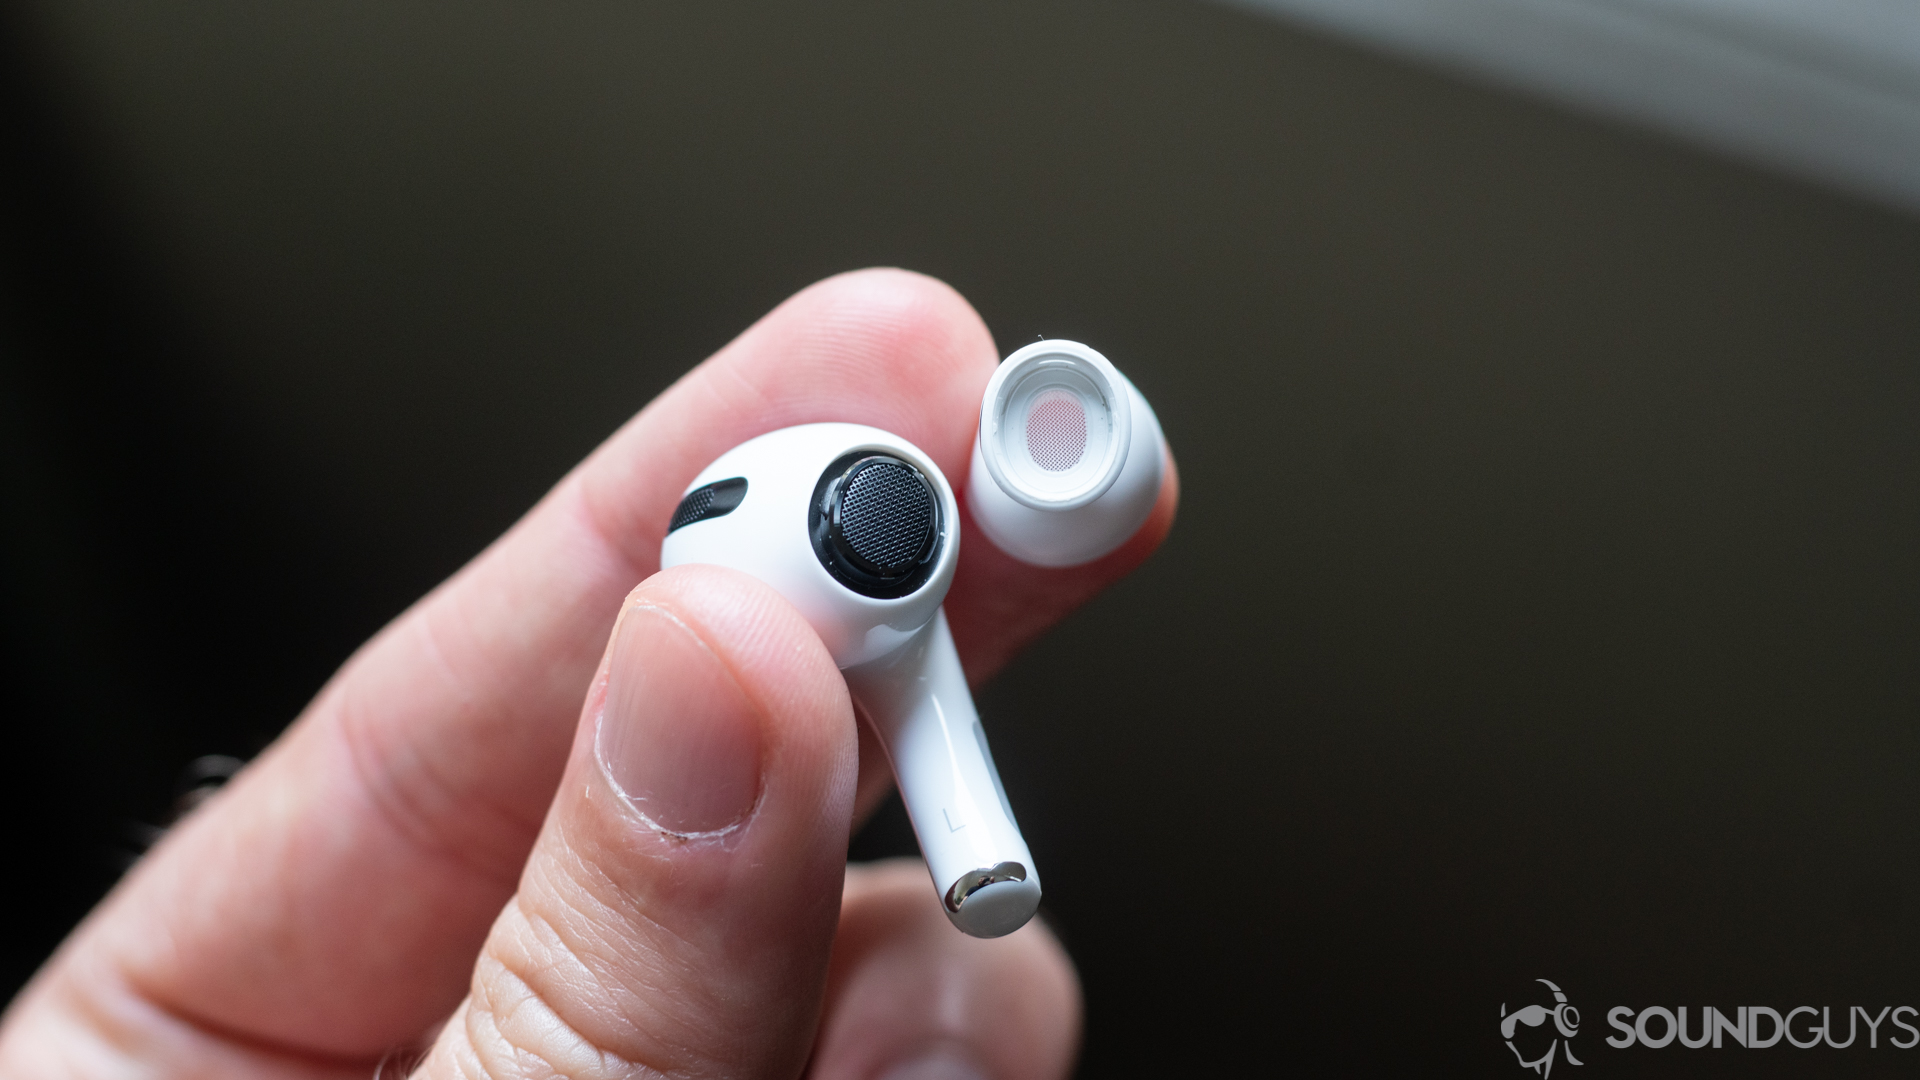 A picture of the Apple AirPods Pro earbuds silicone ear tip removed from the earbud and in a man's hand.